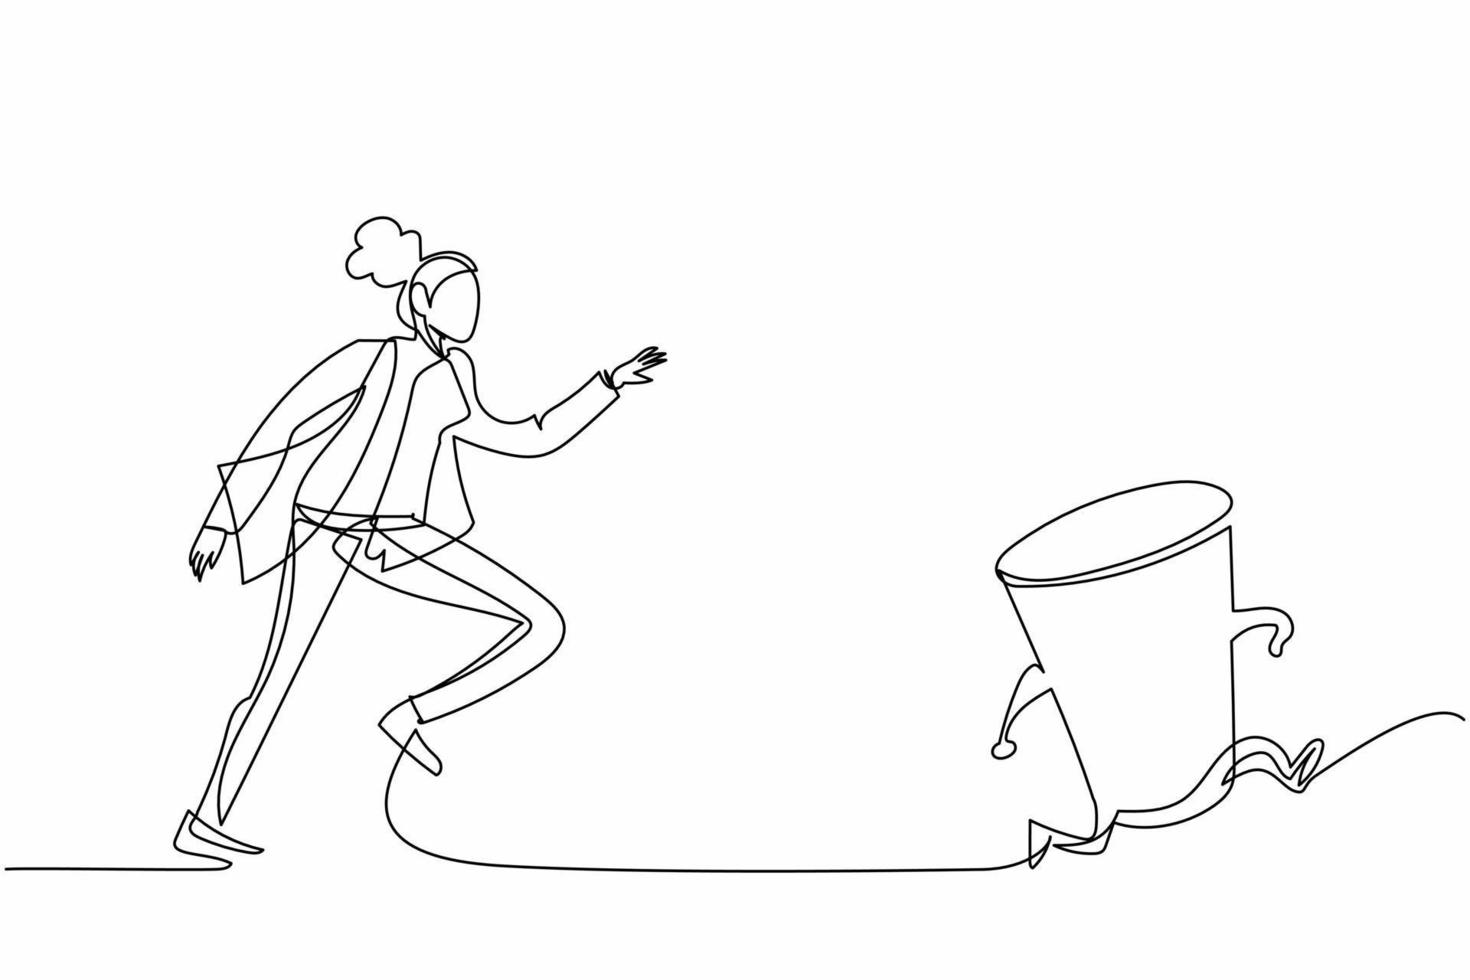 Single one line drawing businesswoman run chasing try to catch paper cup. Concept of drink, thirsty, hot coffee, tea, recycling. Business metaphor. Continuous line design graphic vector illustration